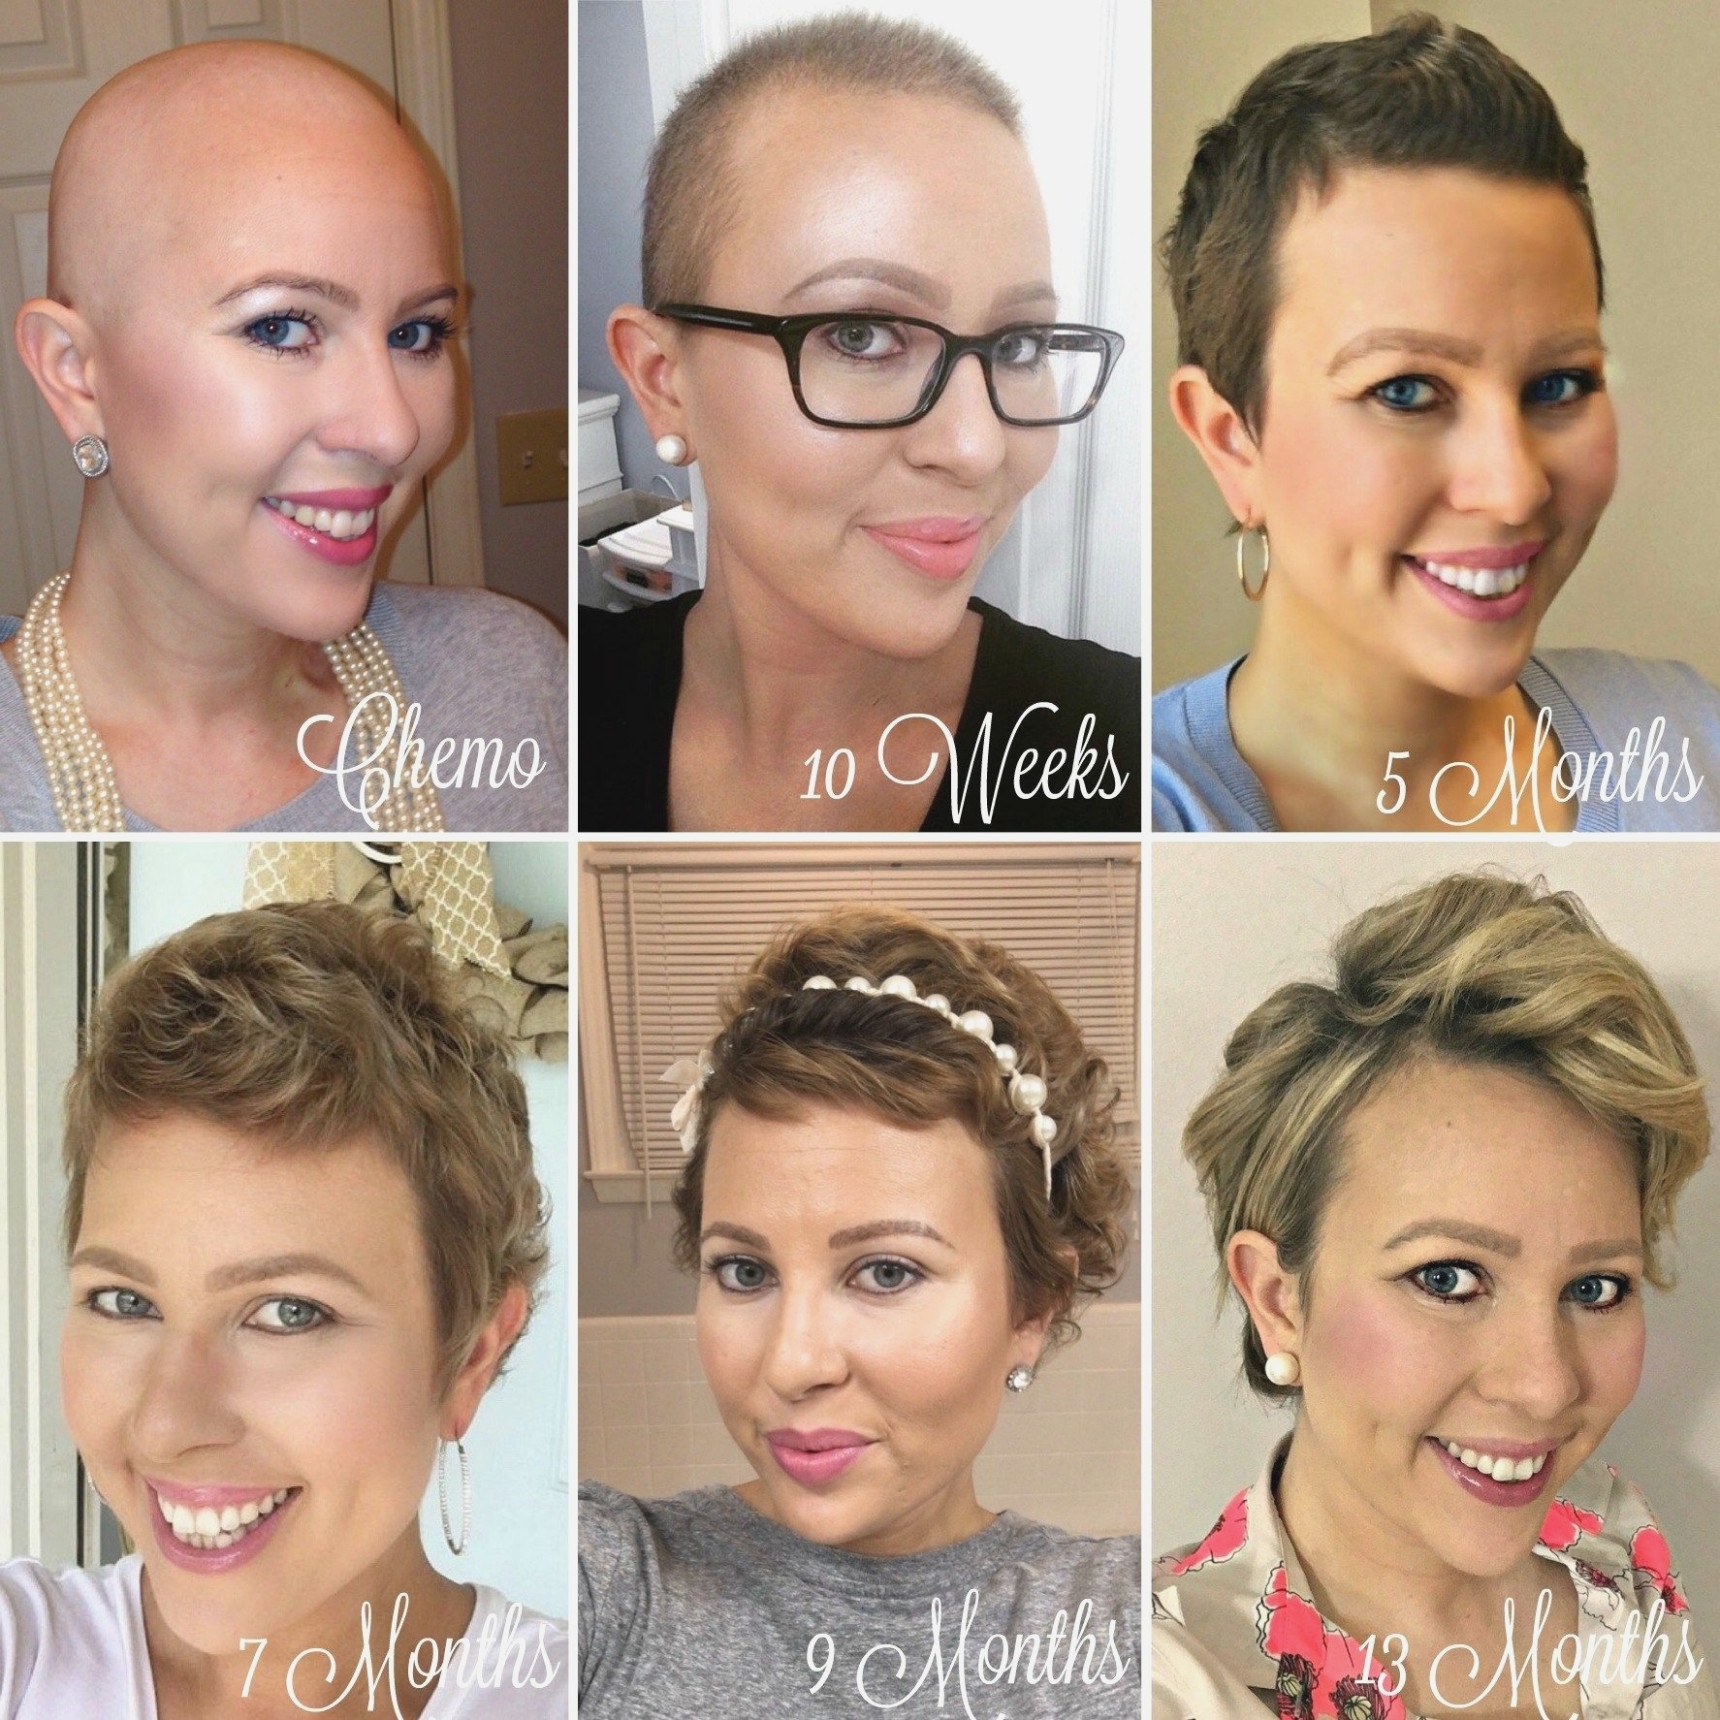 Reasons Why Short Haircuts For Cancer | The Hairstyles Ideas for Haircut For Cancer Patients